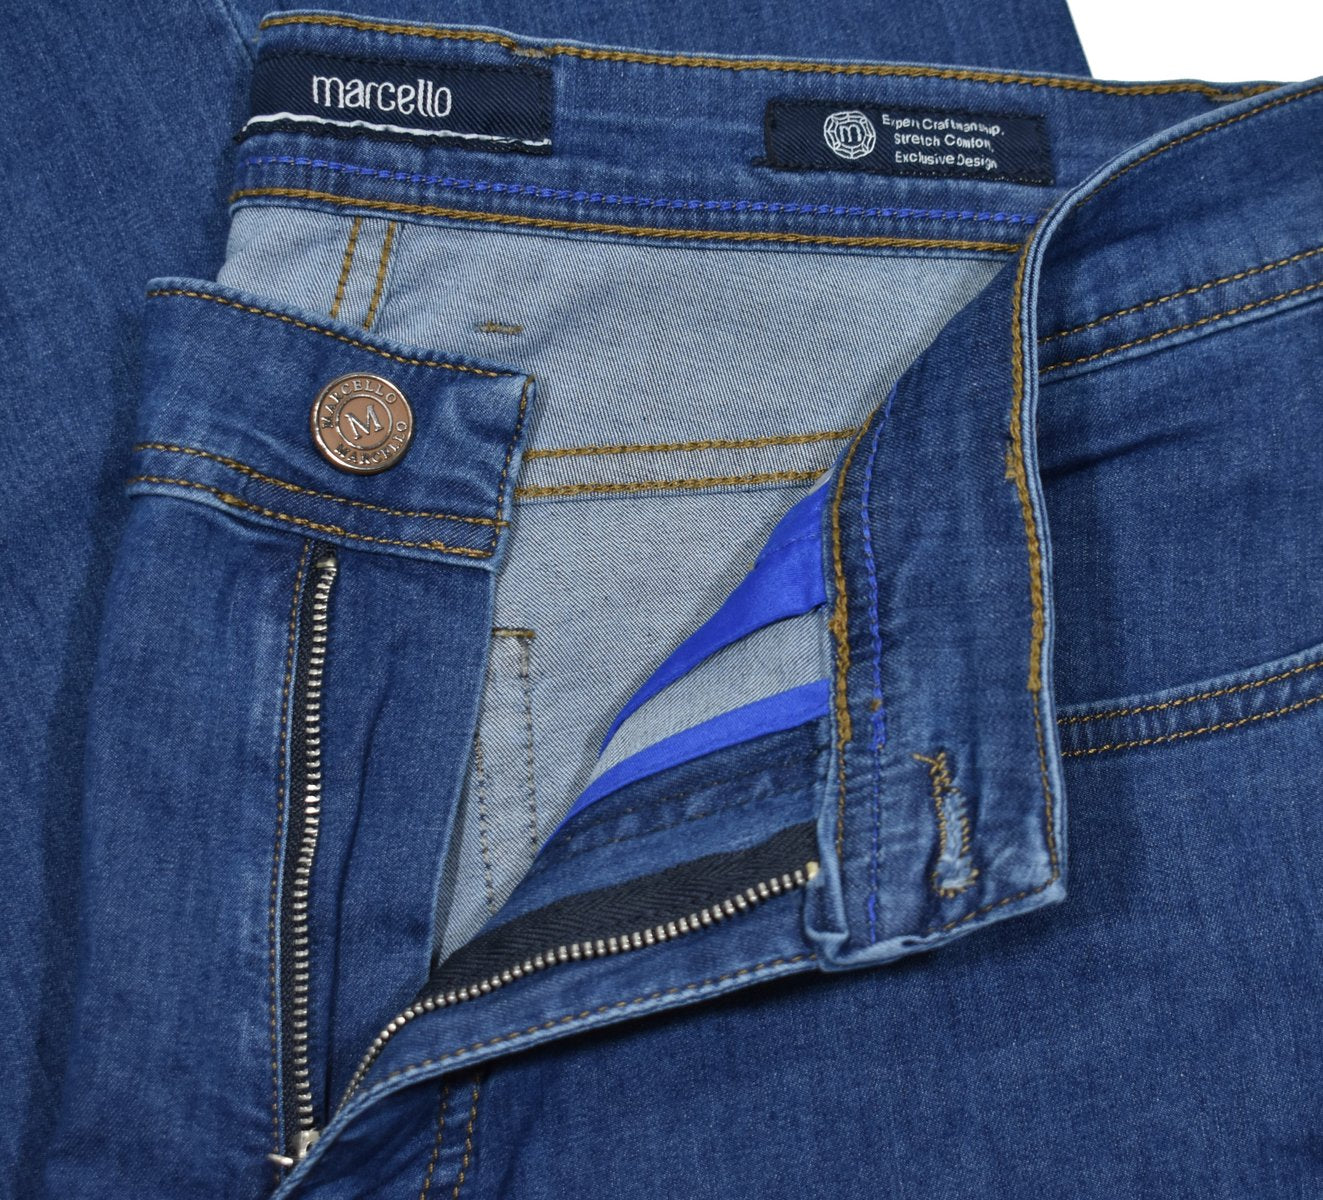 Say goodbye to stiff denim and hello to our LP27 Stretch Lightweight Denim. These jeans feature an ultra-light cotton-elastin fabric that moves with your body for exceptional comfort. The slimmer fit offers a contemporary leg and a relaxed look you'll love! Amazingly comfortable and stylish - what more could you want? A Marcello Exclusive.